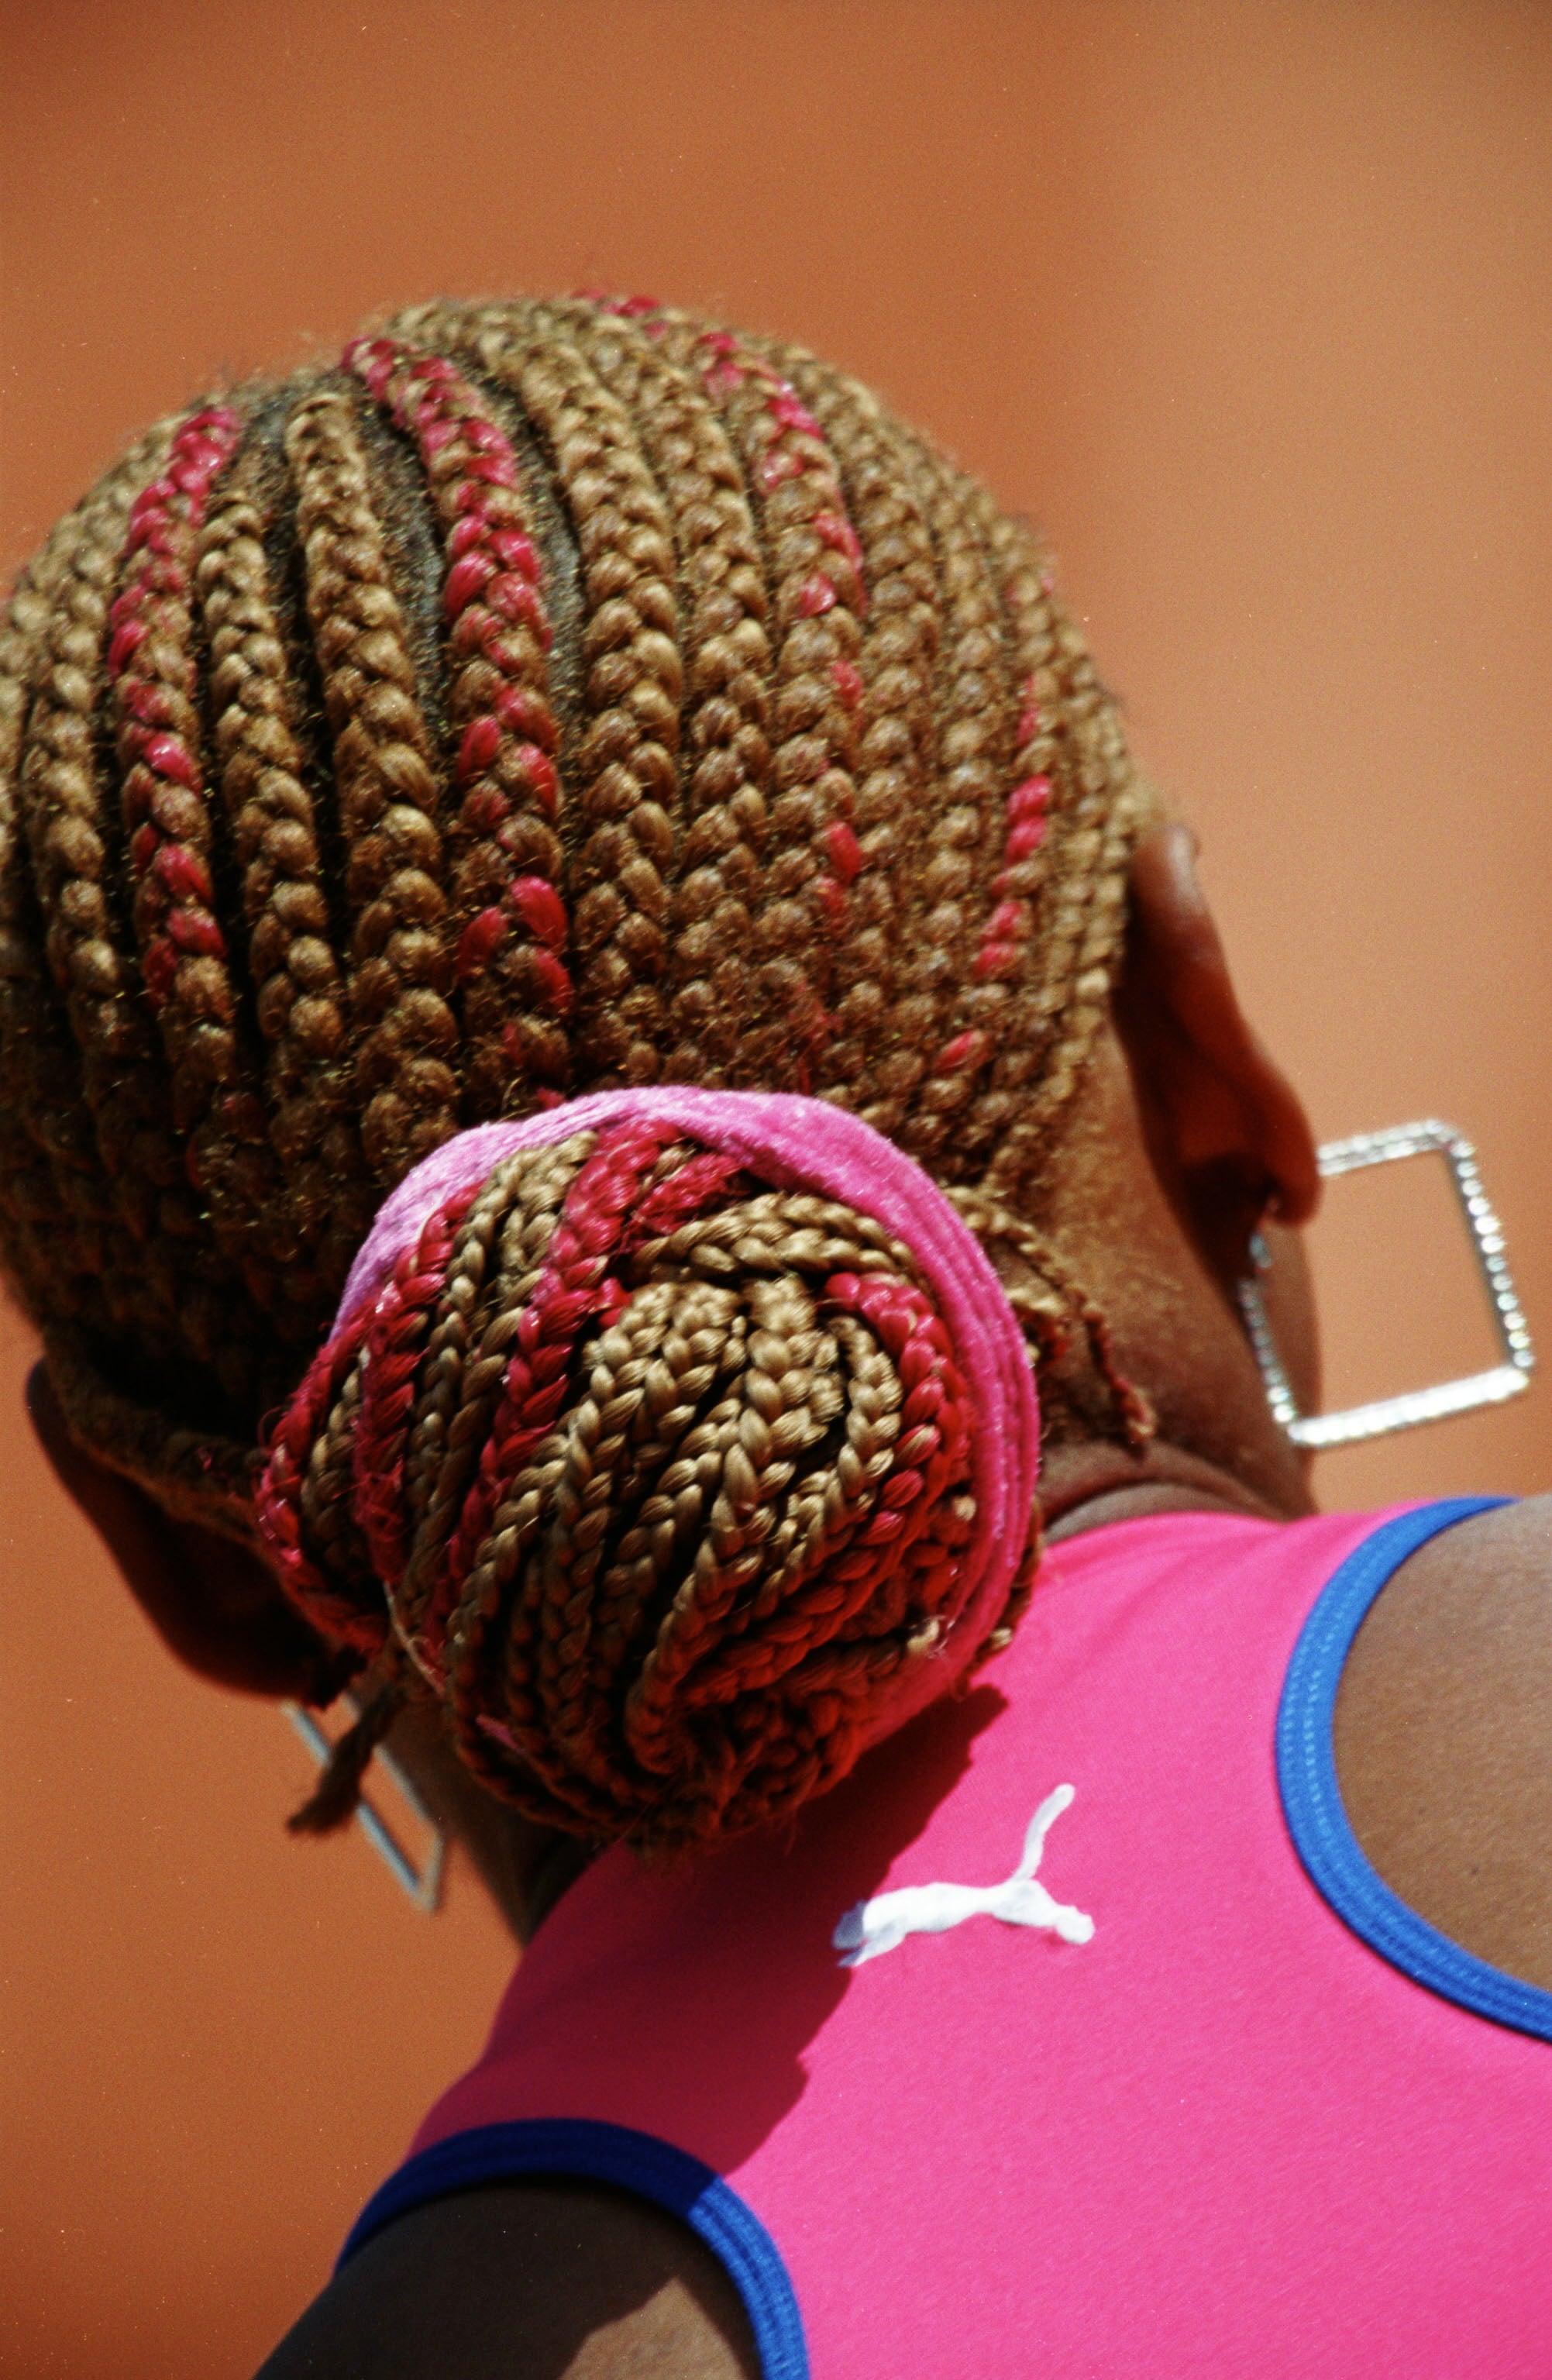 Serena Williams Shares The Tradition Of Hair Braiding With Her 1-Year-Old Daughter